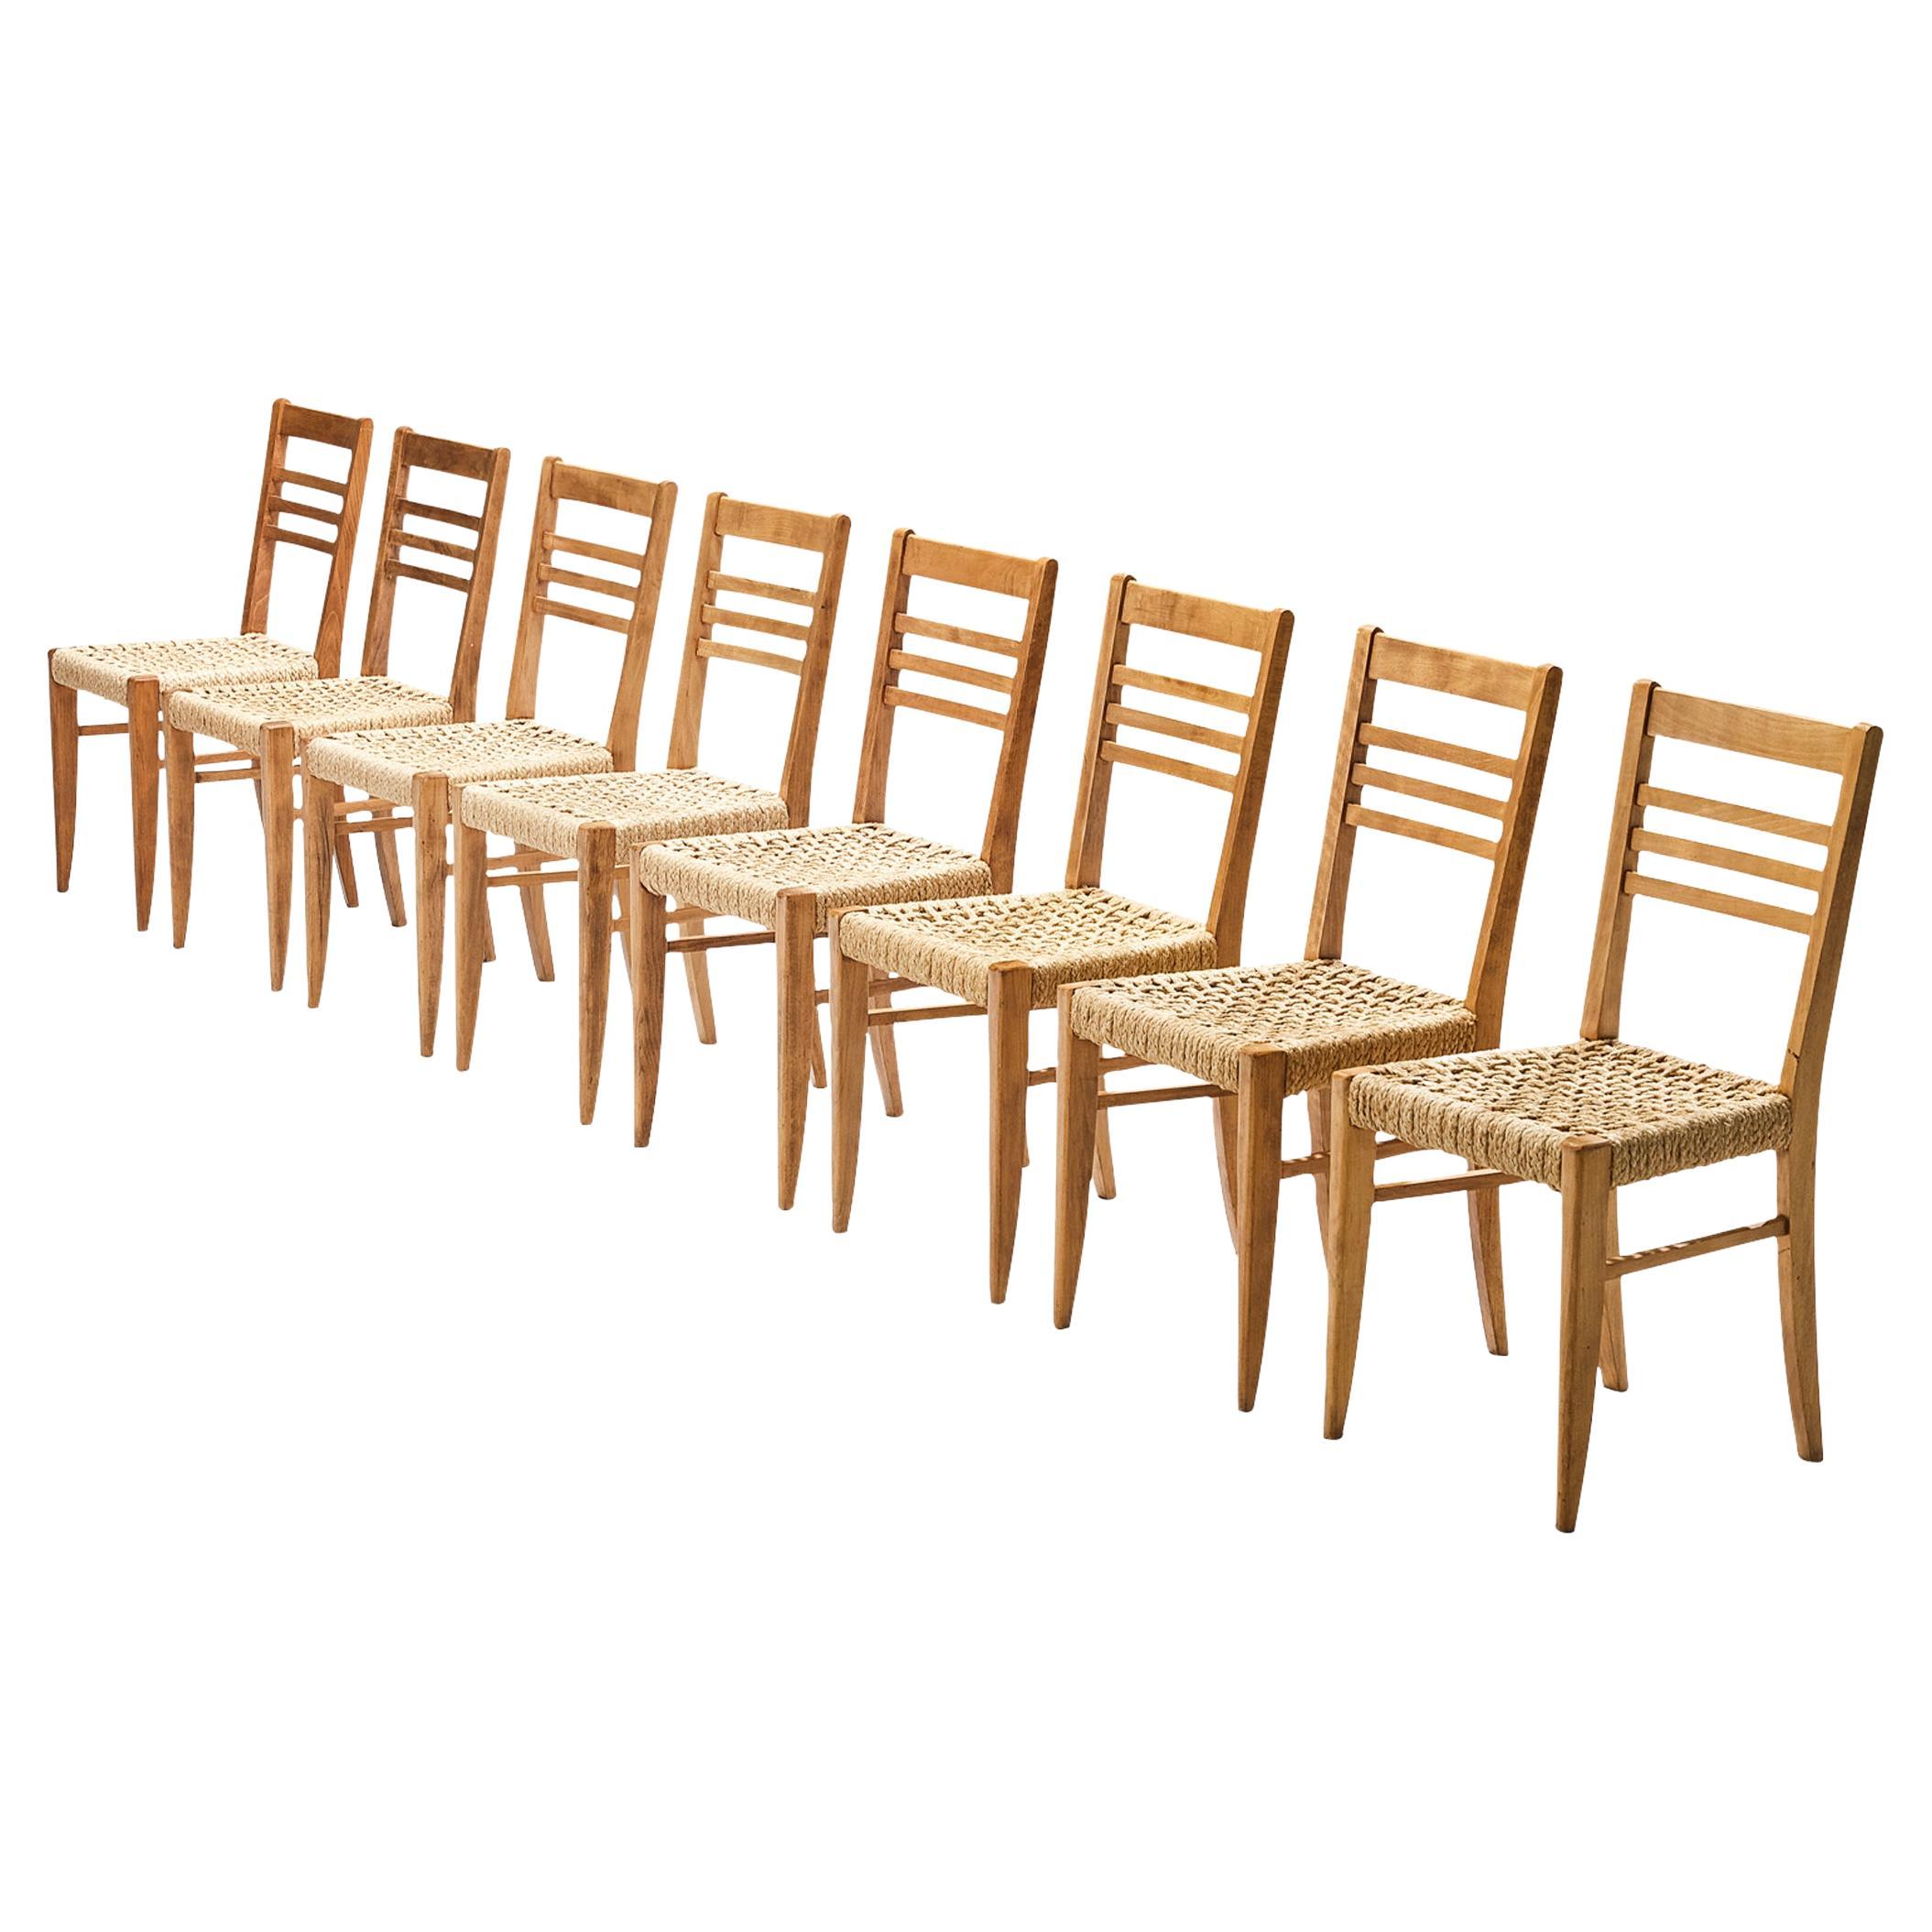 Adrien Audoux & Frida Minet Set of Eight Dining Chairs in Braided Hem